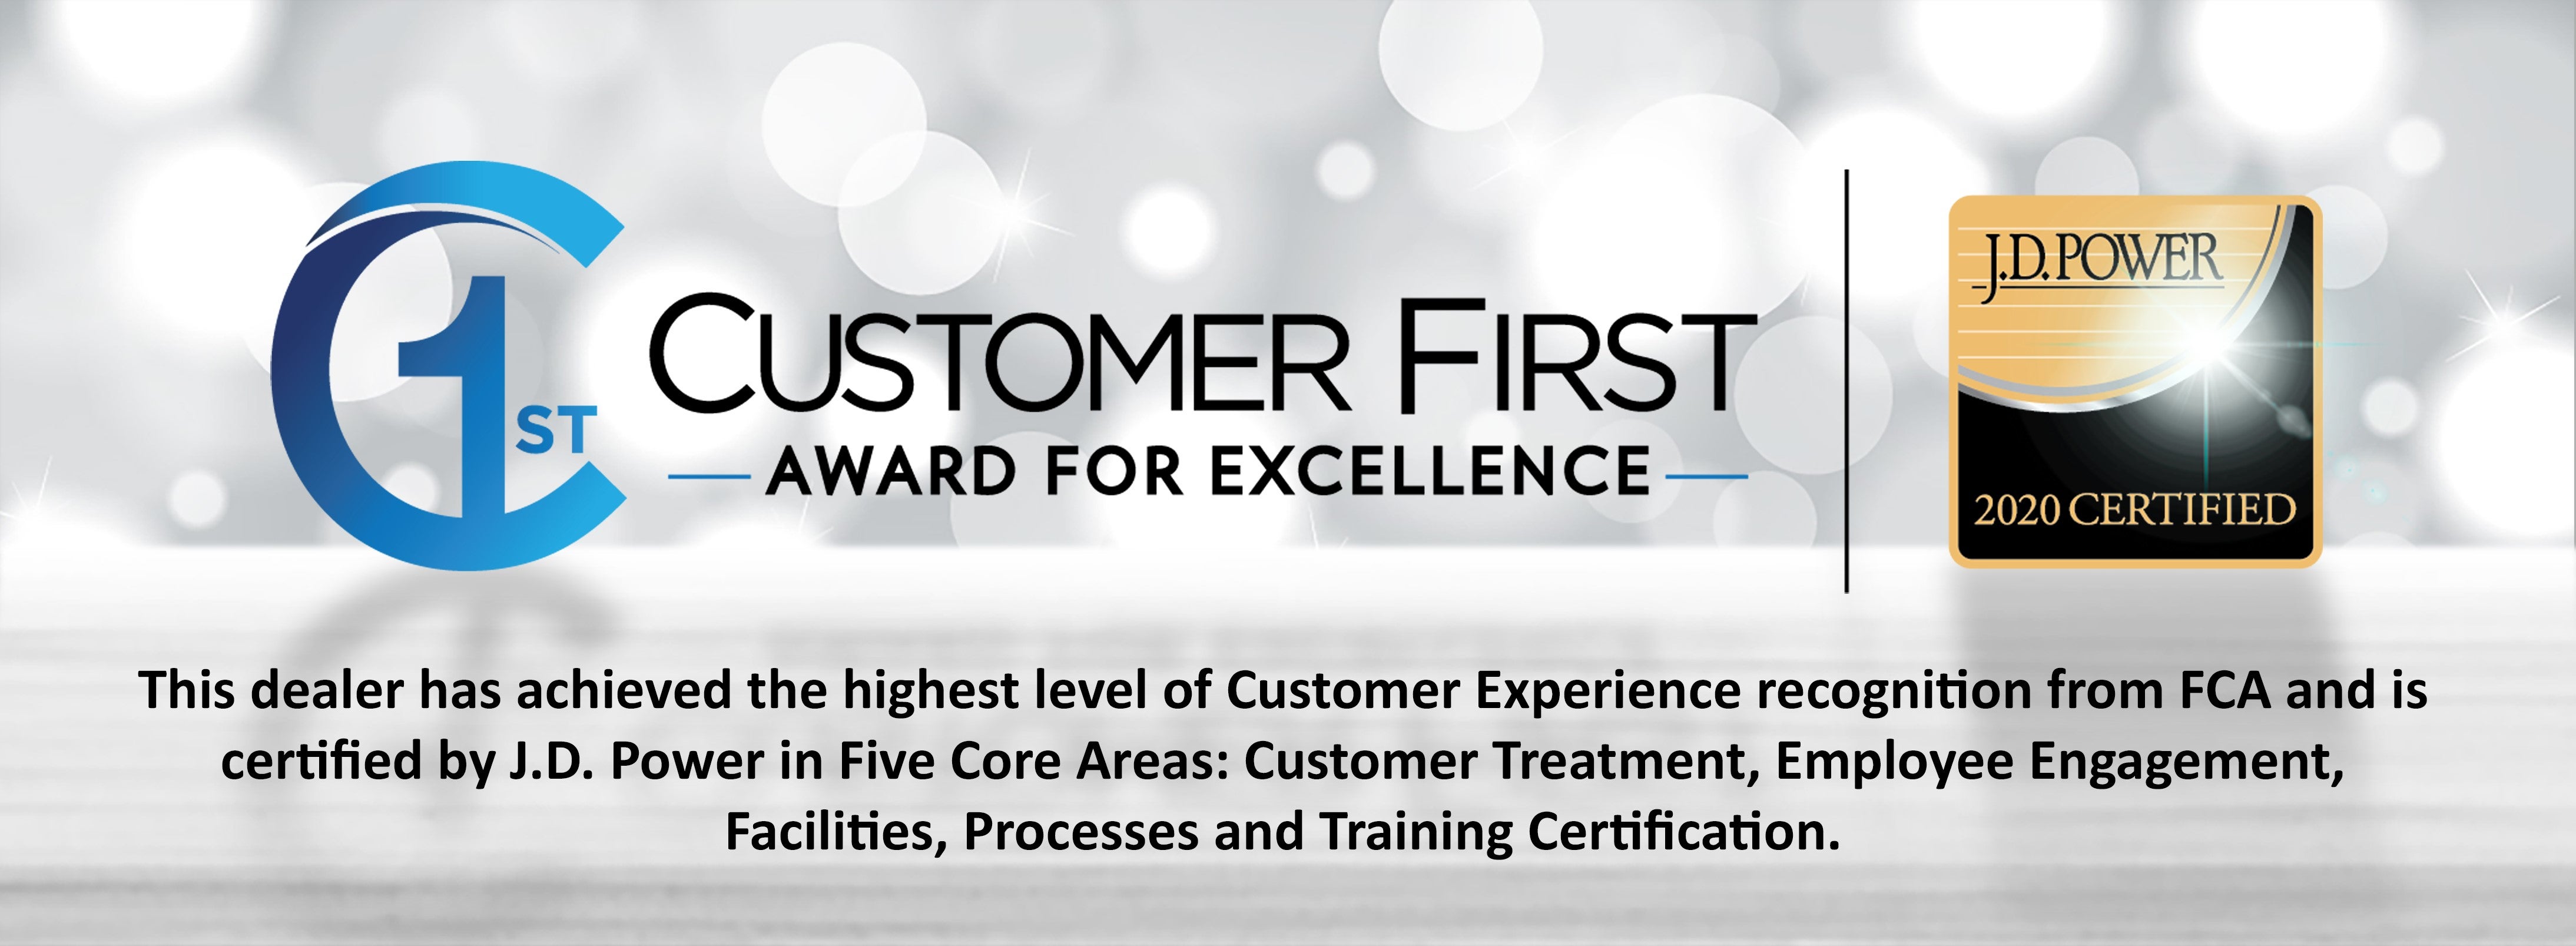 Customer First Award for Excellence for 2019 at Duncan Chrysler Dodge Jeep RAM in Rocky Mount, VA